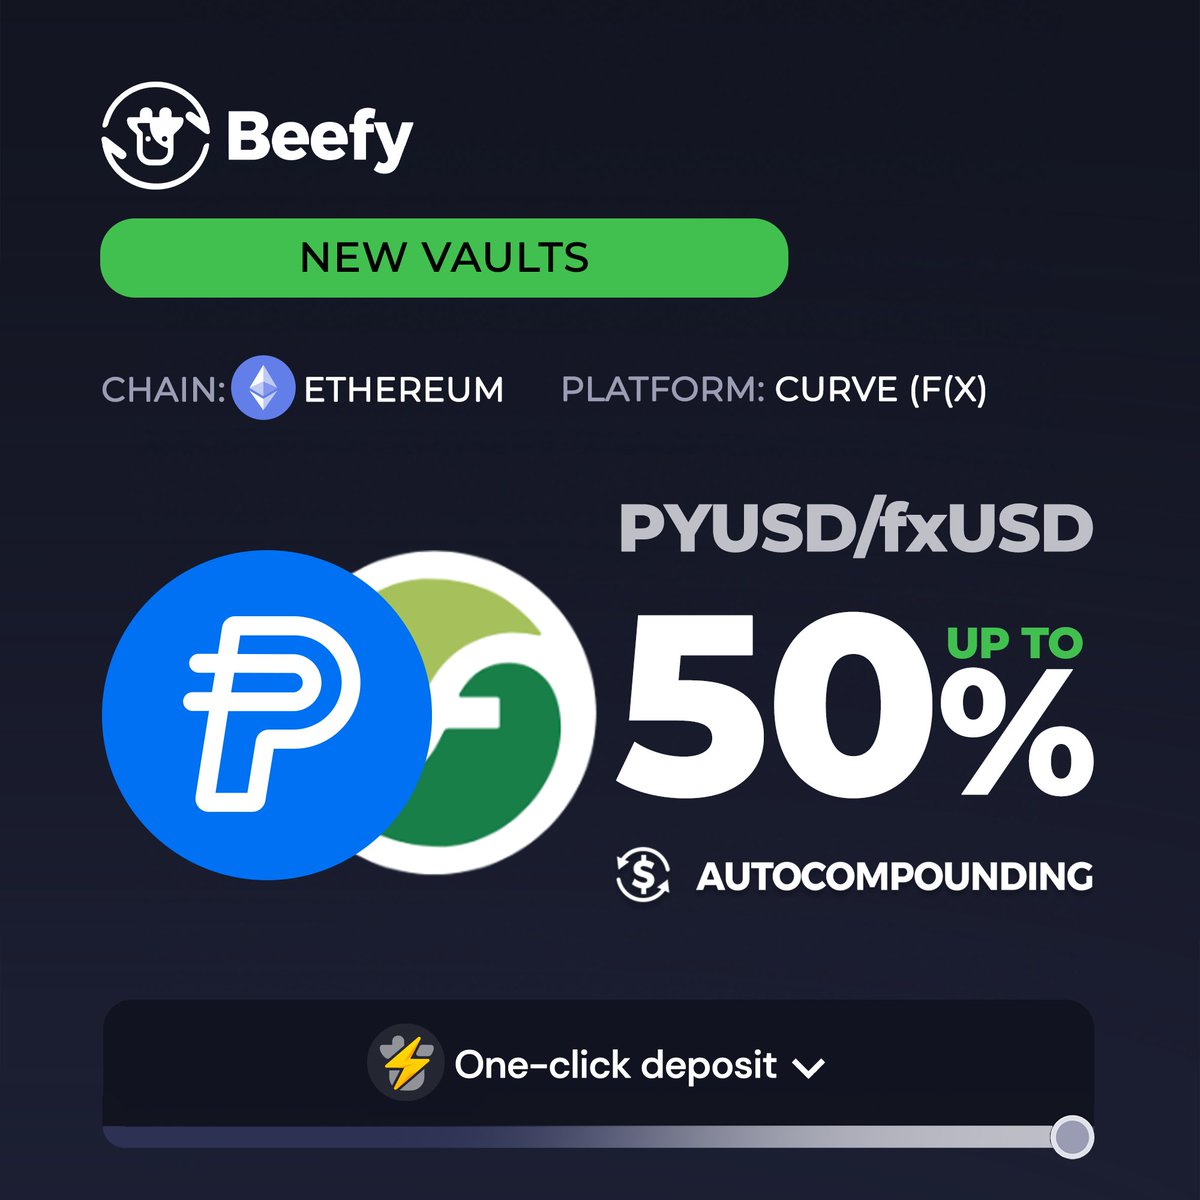 How do you feel about PYUSD to other stablecoins? 🆕 $PYUSD - $fxUSD: 50% APY 👉 app.beefy.com/vault/fx-pyusd… @curvefinance @protocol_fx #ethereum